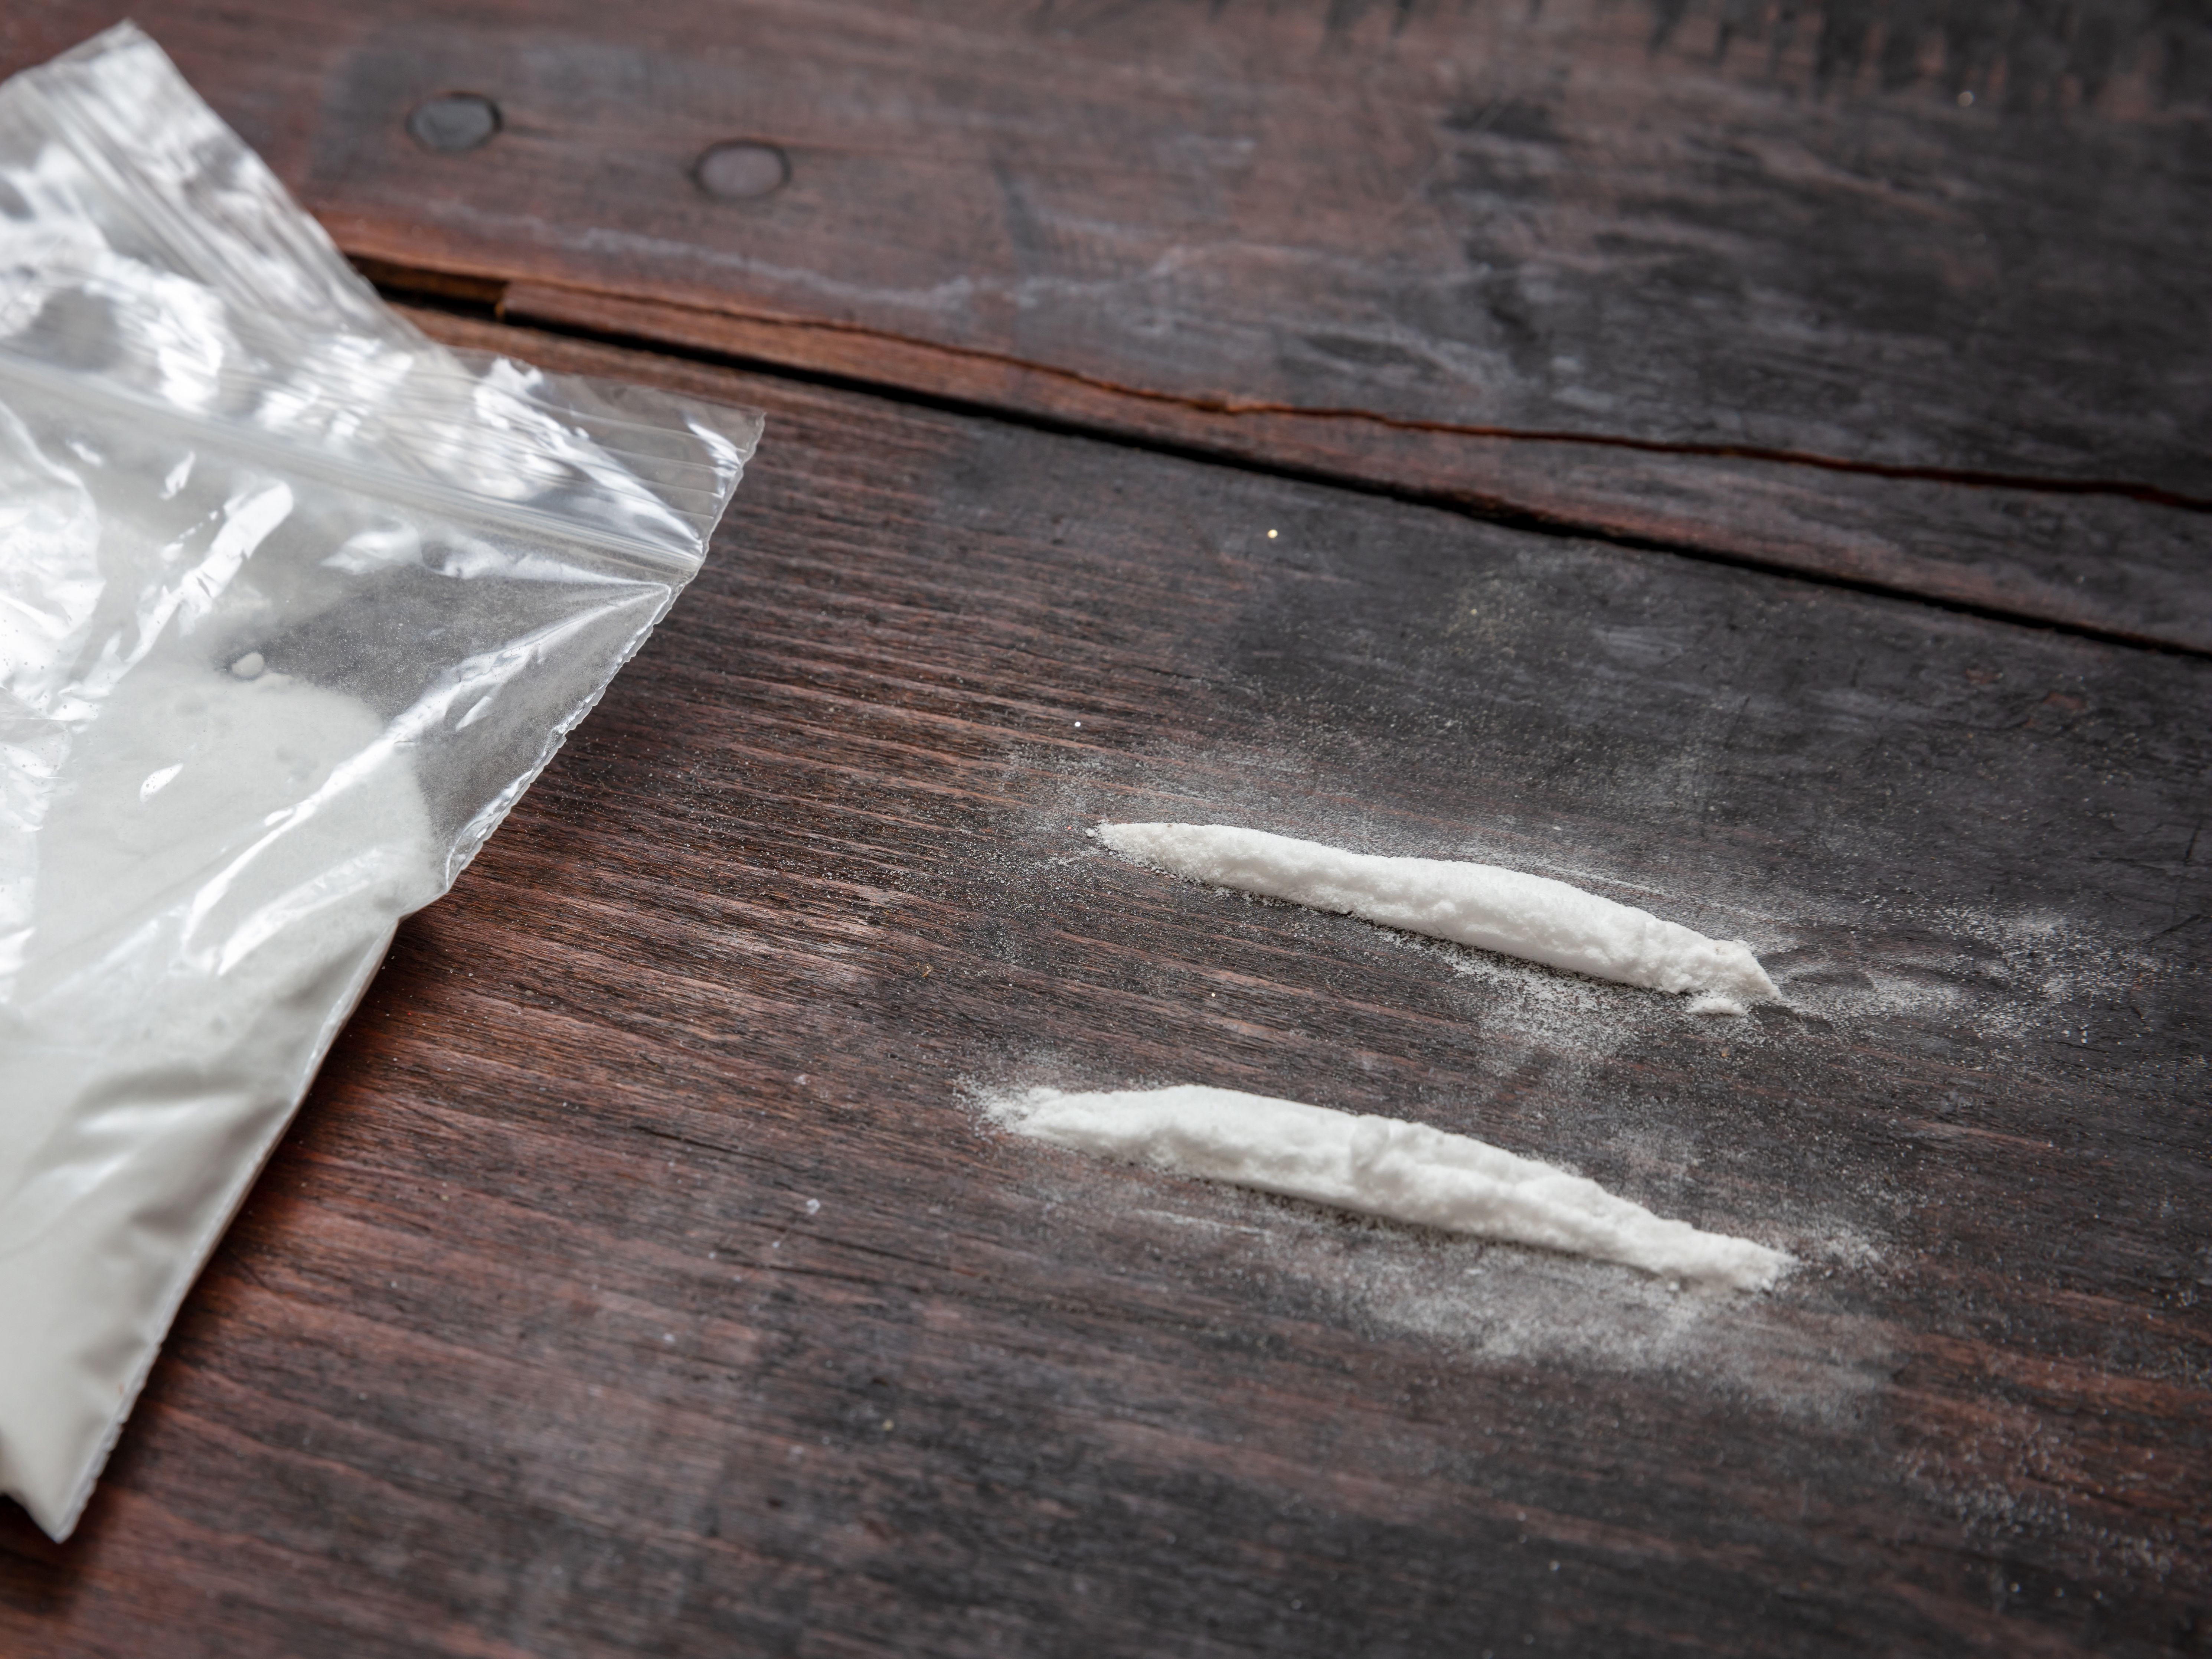 Cocaine Plastic Packets And Two Lines On Wooden Ta 2021 09 04 15 51 40 Utc